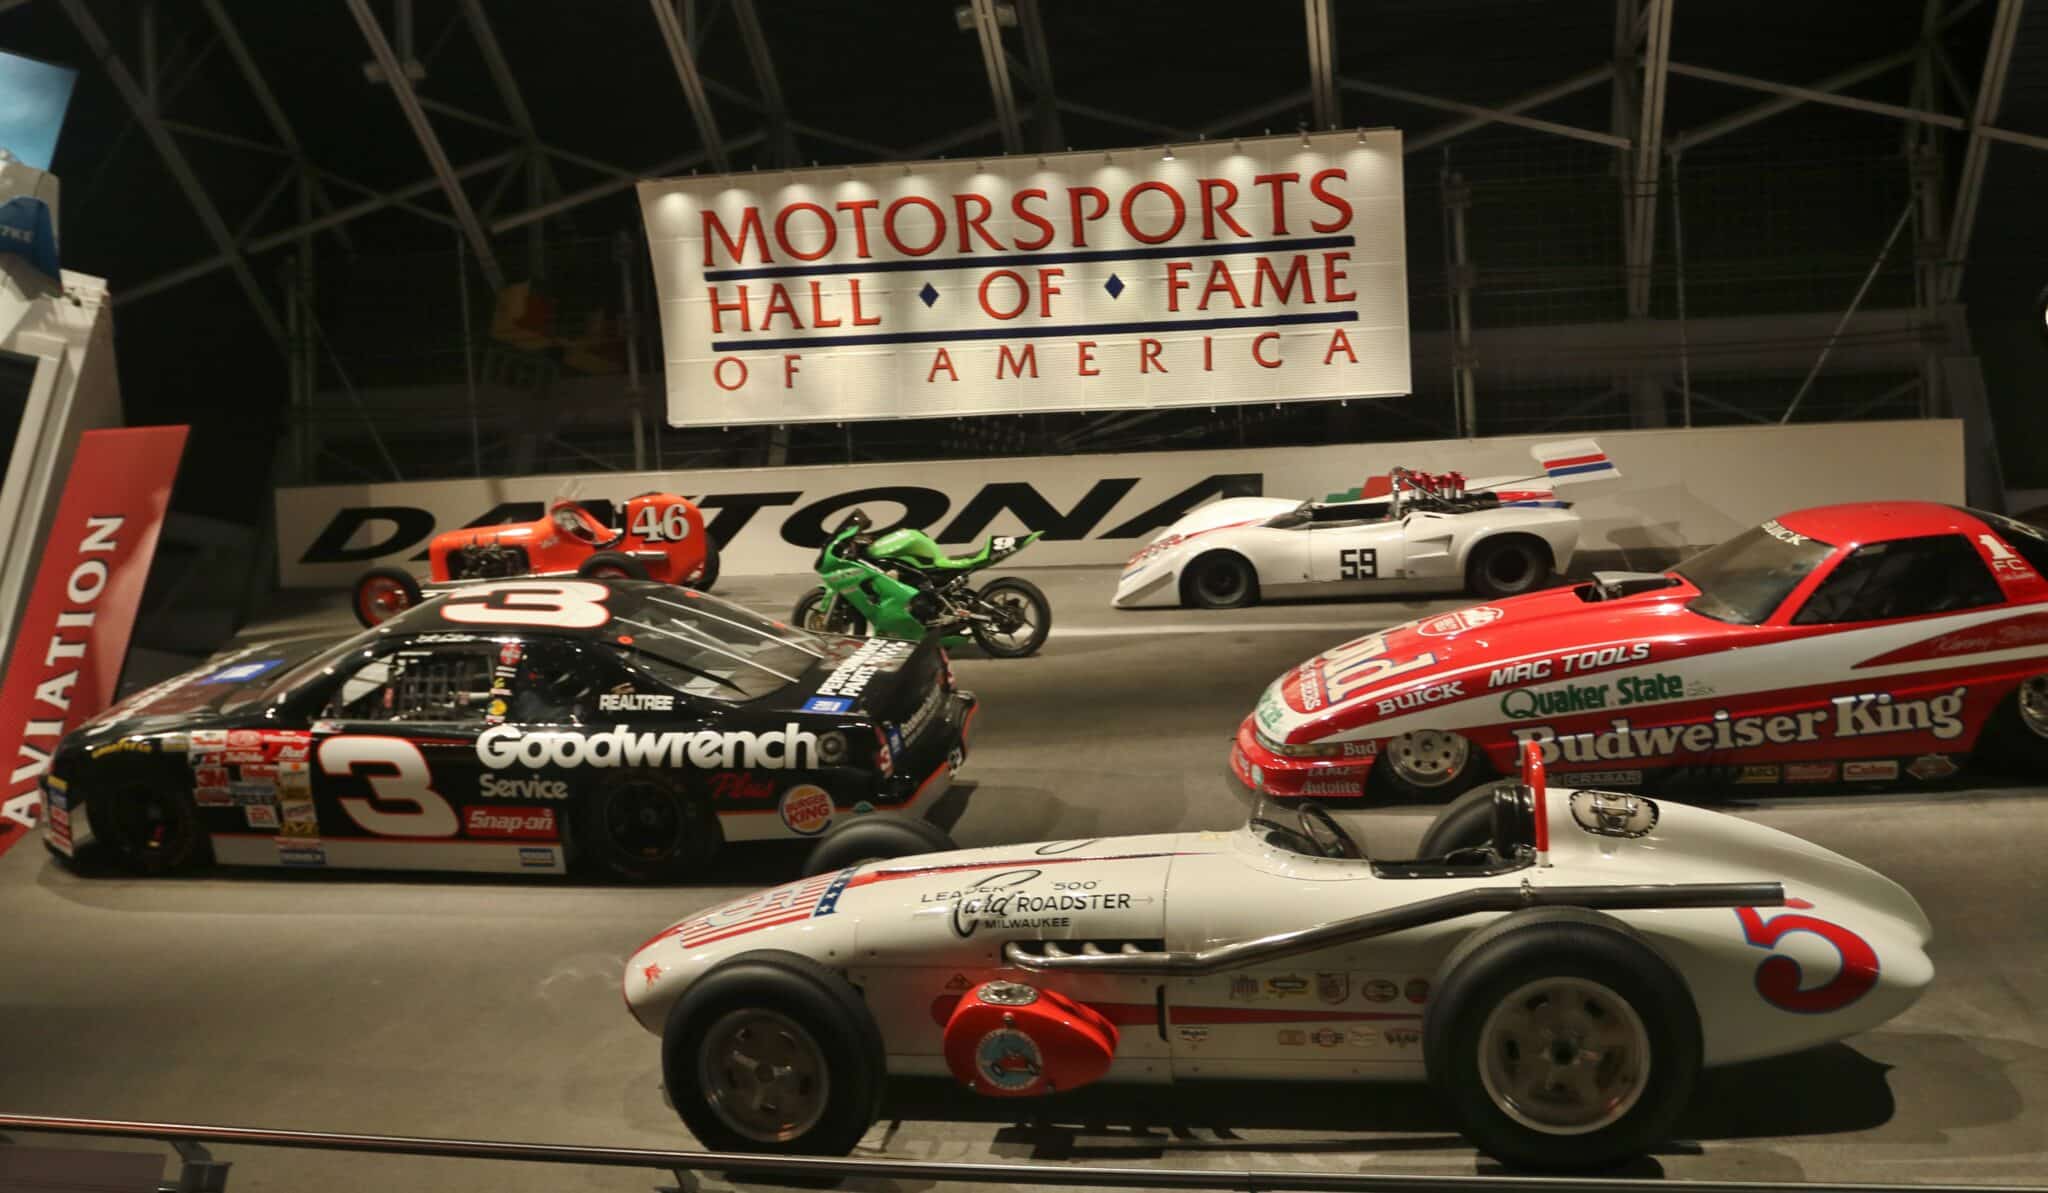 Array of classic vehicles in the Motorsports Hall of Fame (Credit: Bill Rockwell)